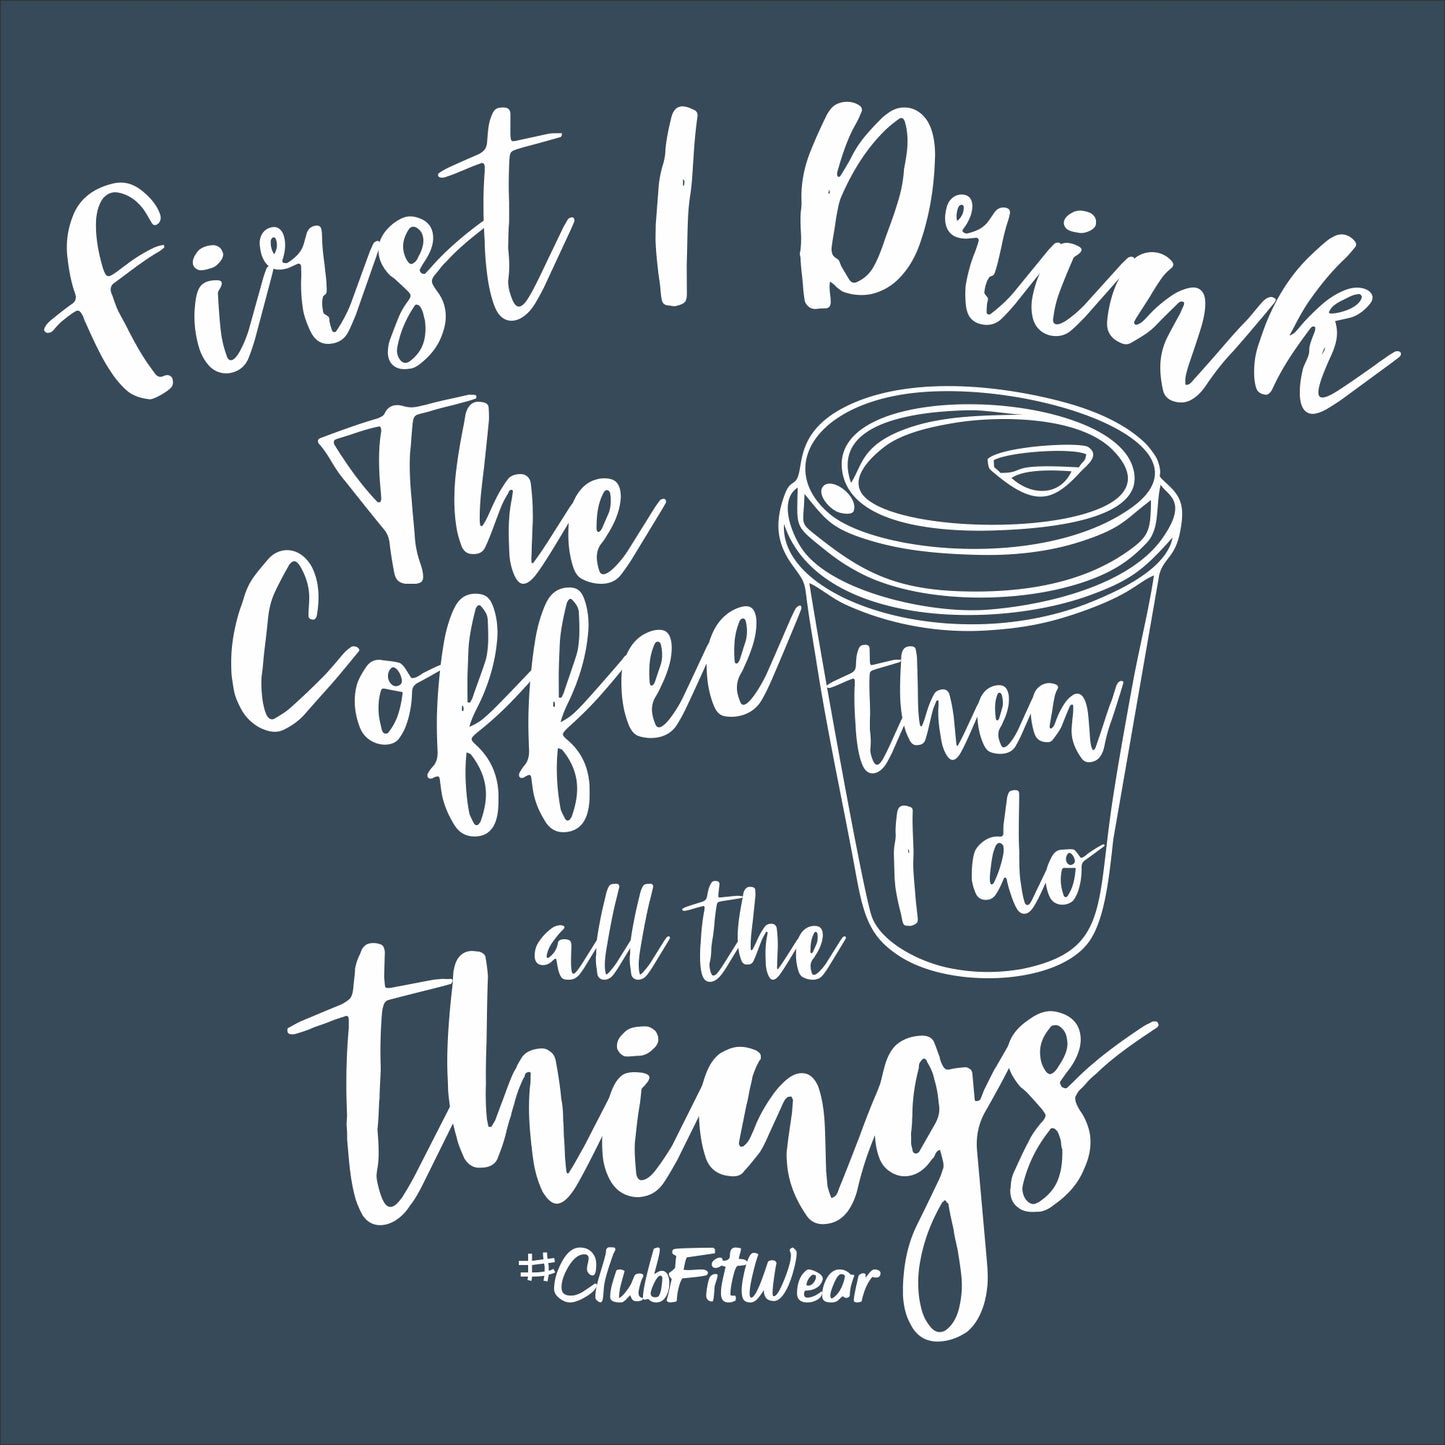 First I Drink The Coffee Then I Do All The Things